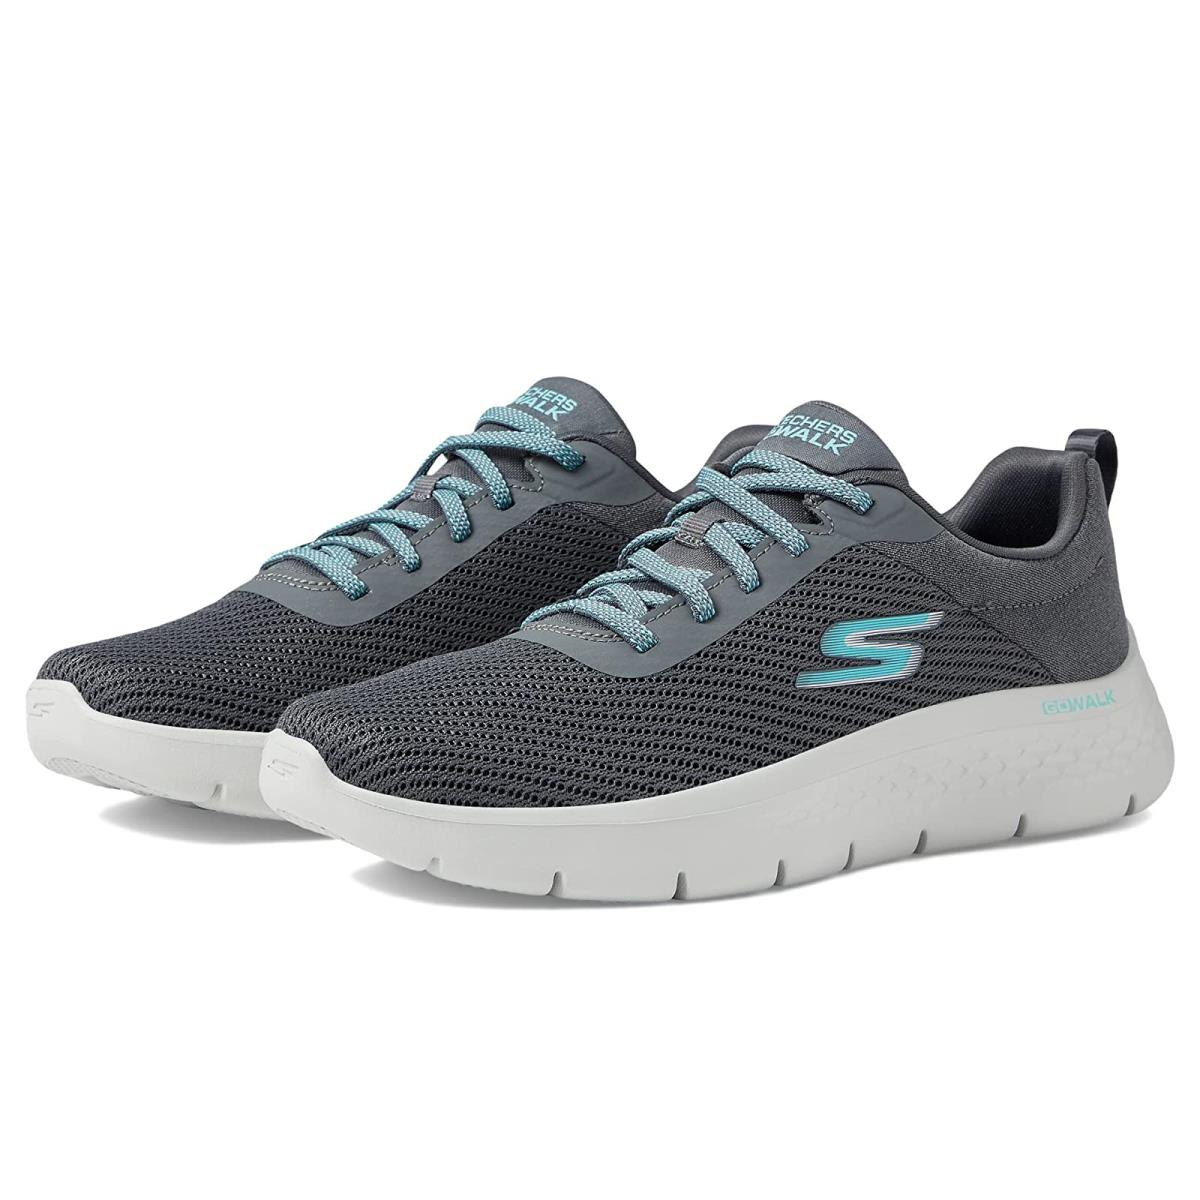 Woman`s Sneakers Athletic Shoes Skechers Performance Go Walk Flex - Alani Charcoal/Turquoise